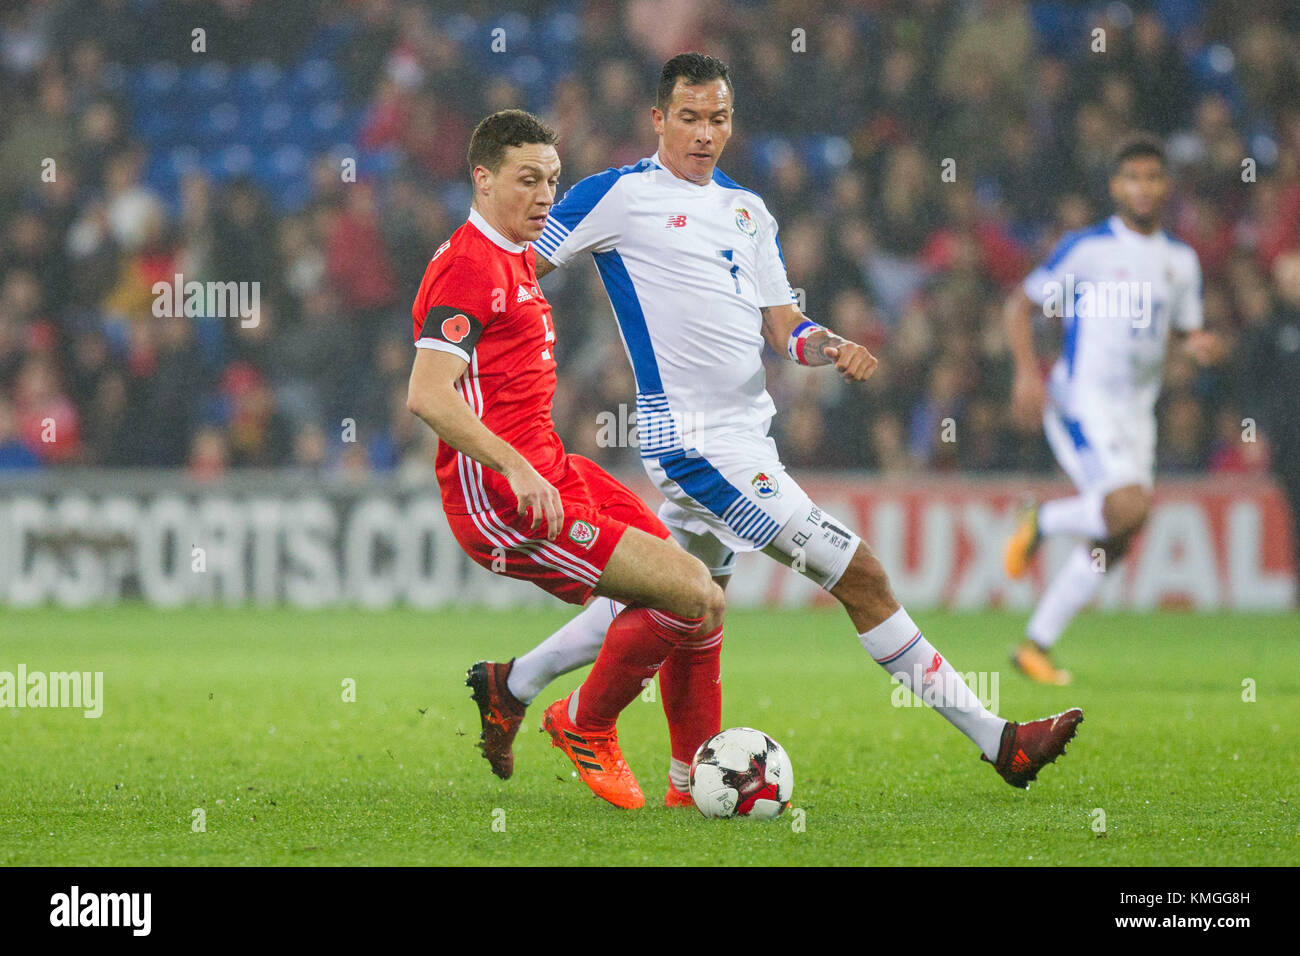 Cardiff, Wales, UK, 14th November 2017: James Chester of Wales shields the ball from Blas Perez of Panama during an International friendly match between Wales and Panama at Cardiff City Stadium. Stock Photo